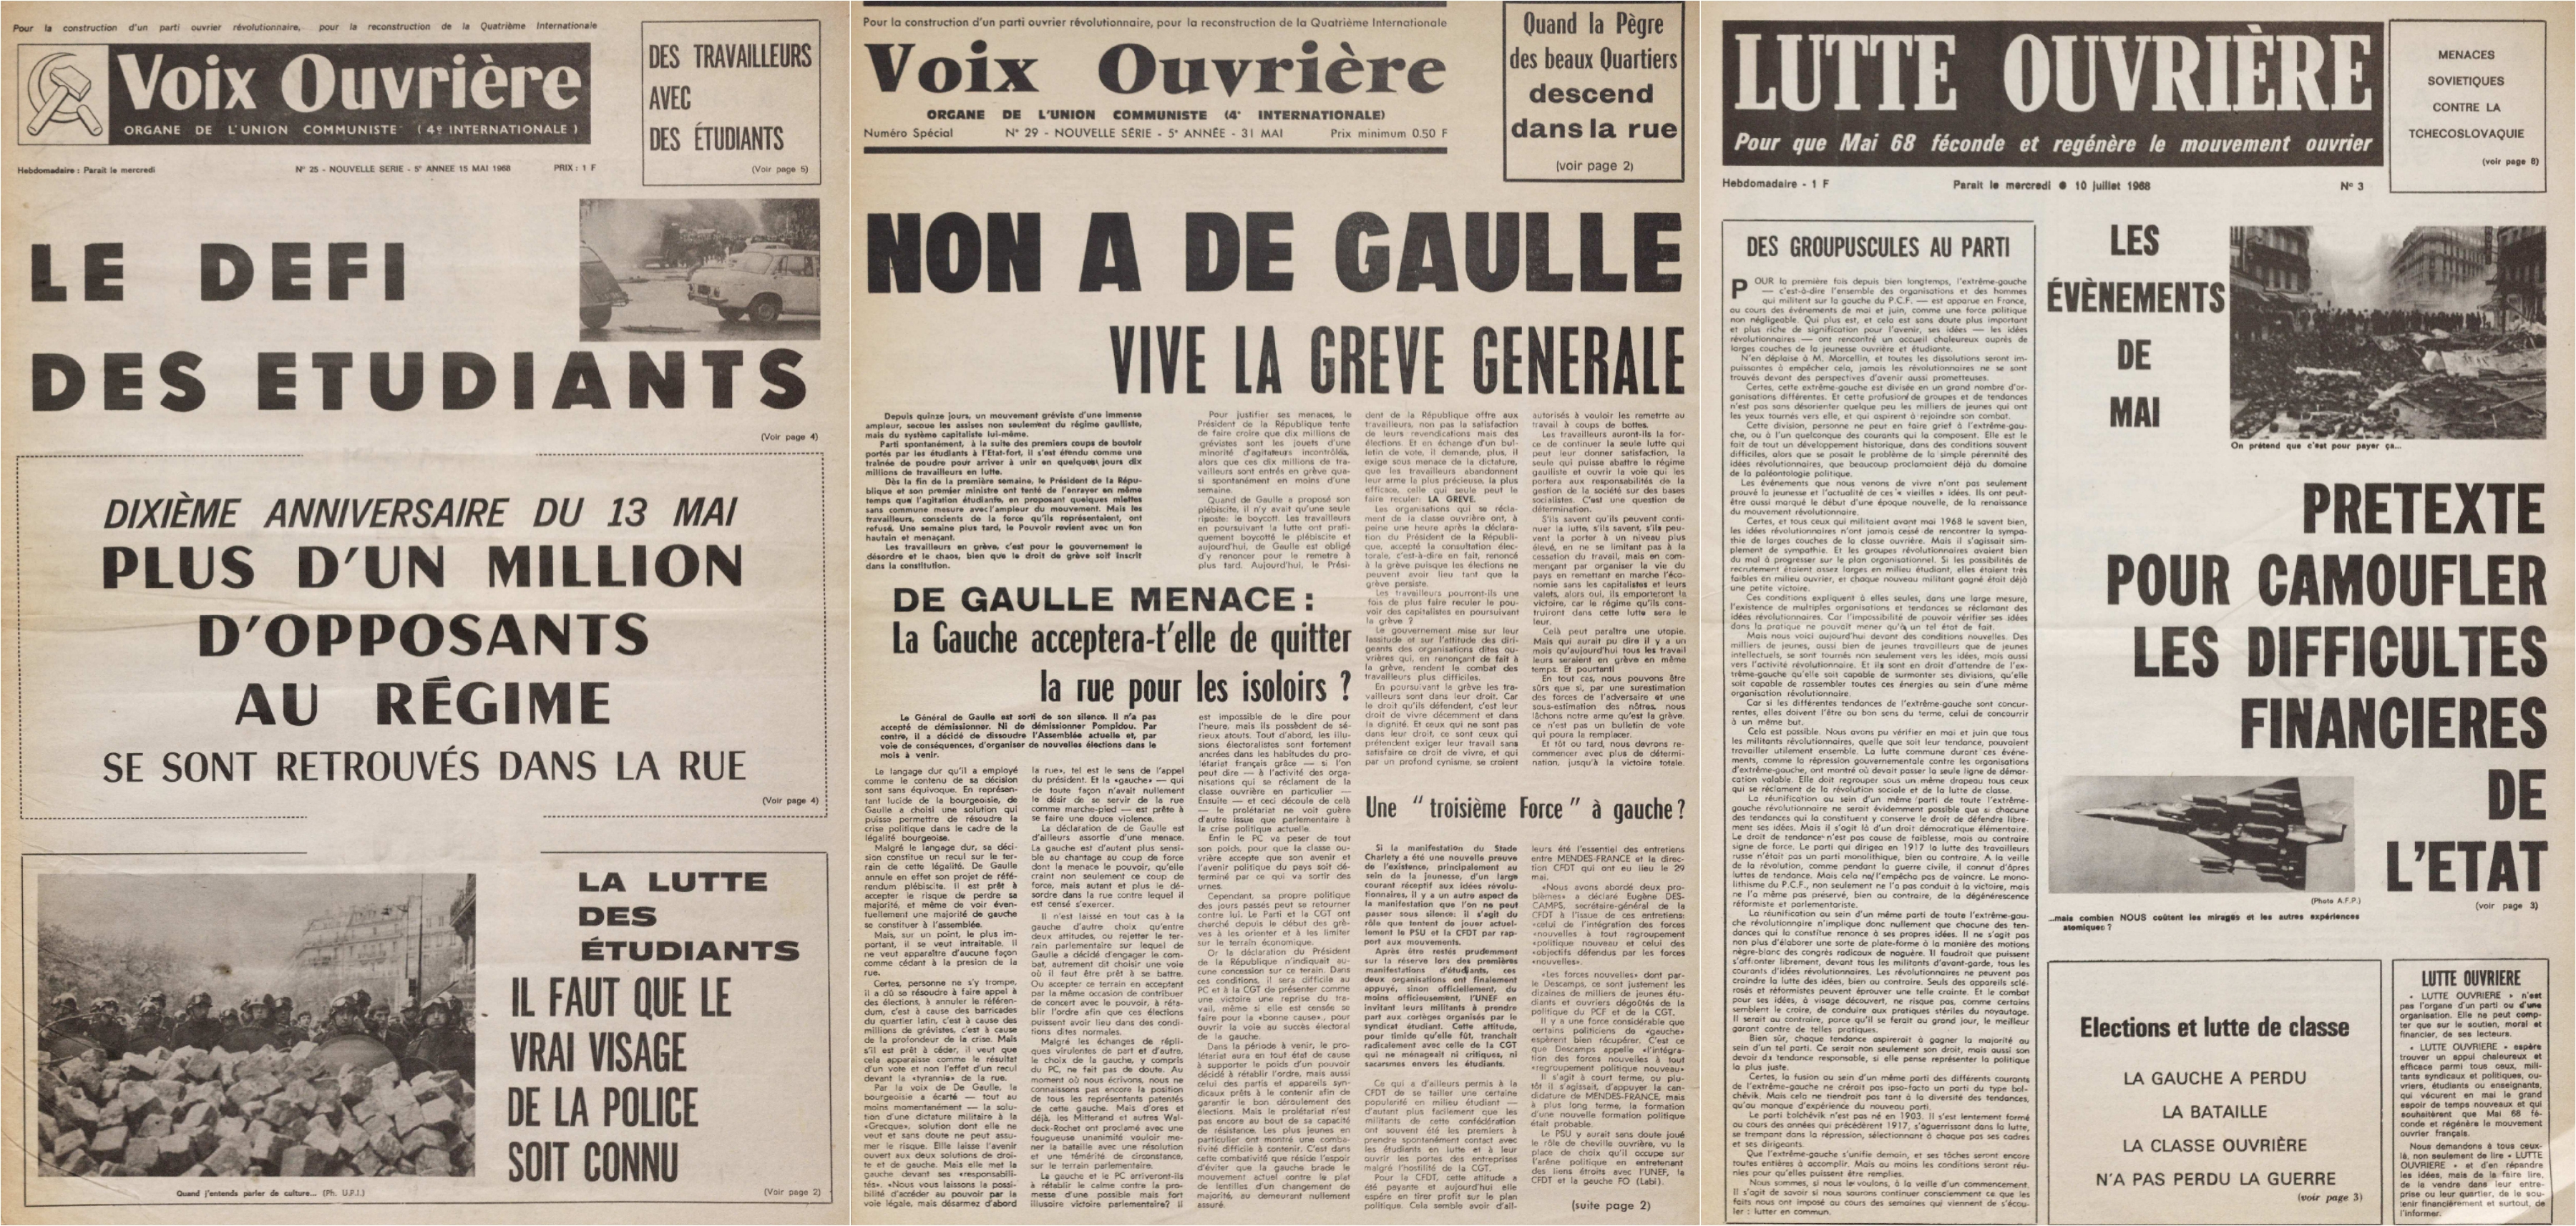 Front pages of newspapers reporting on events around May 1968